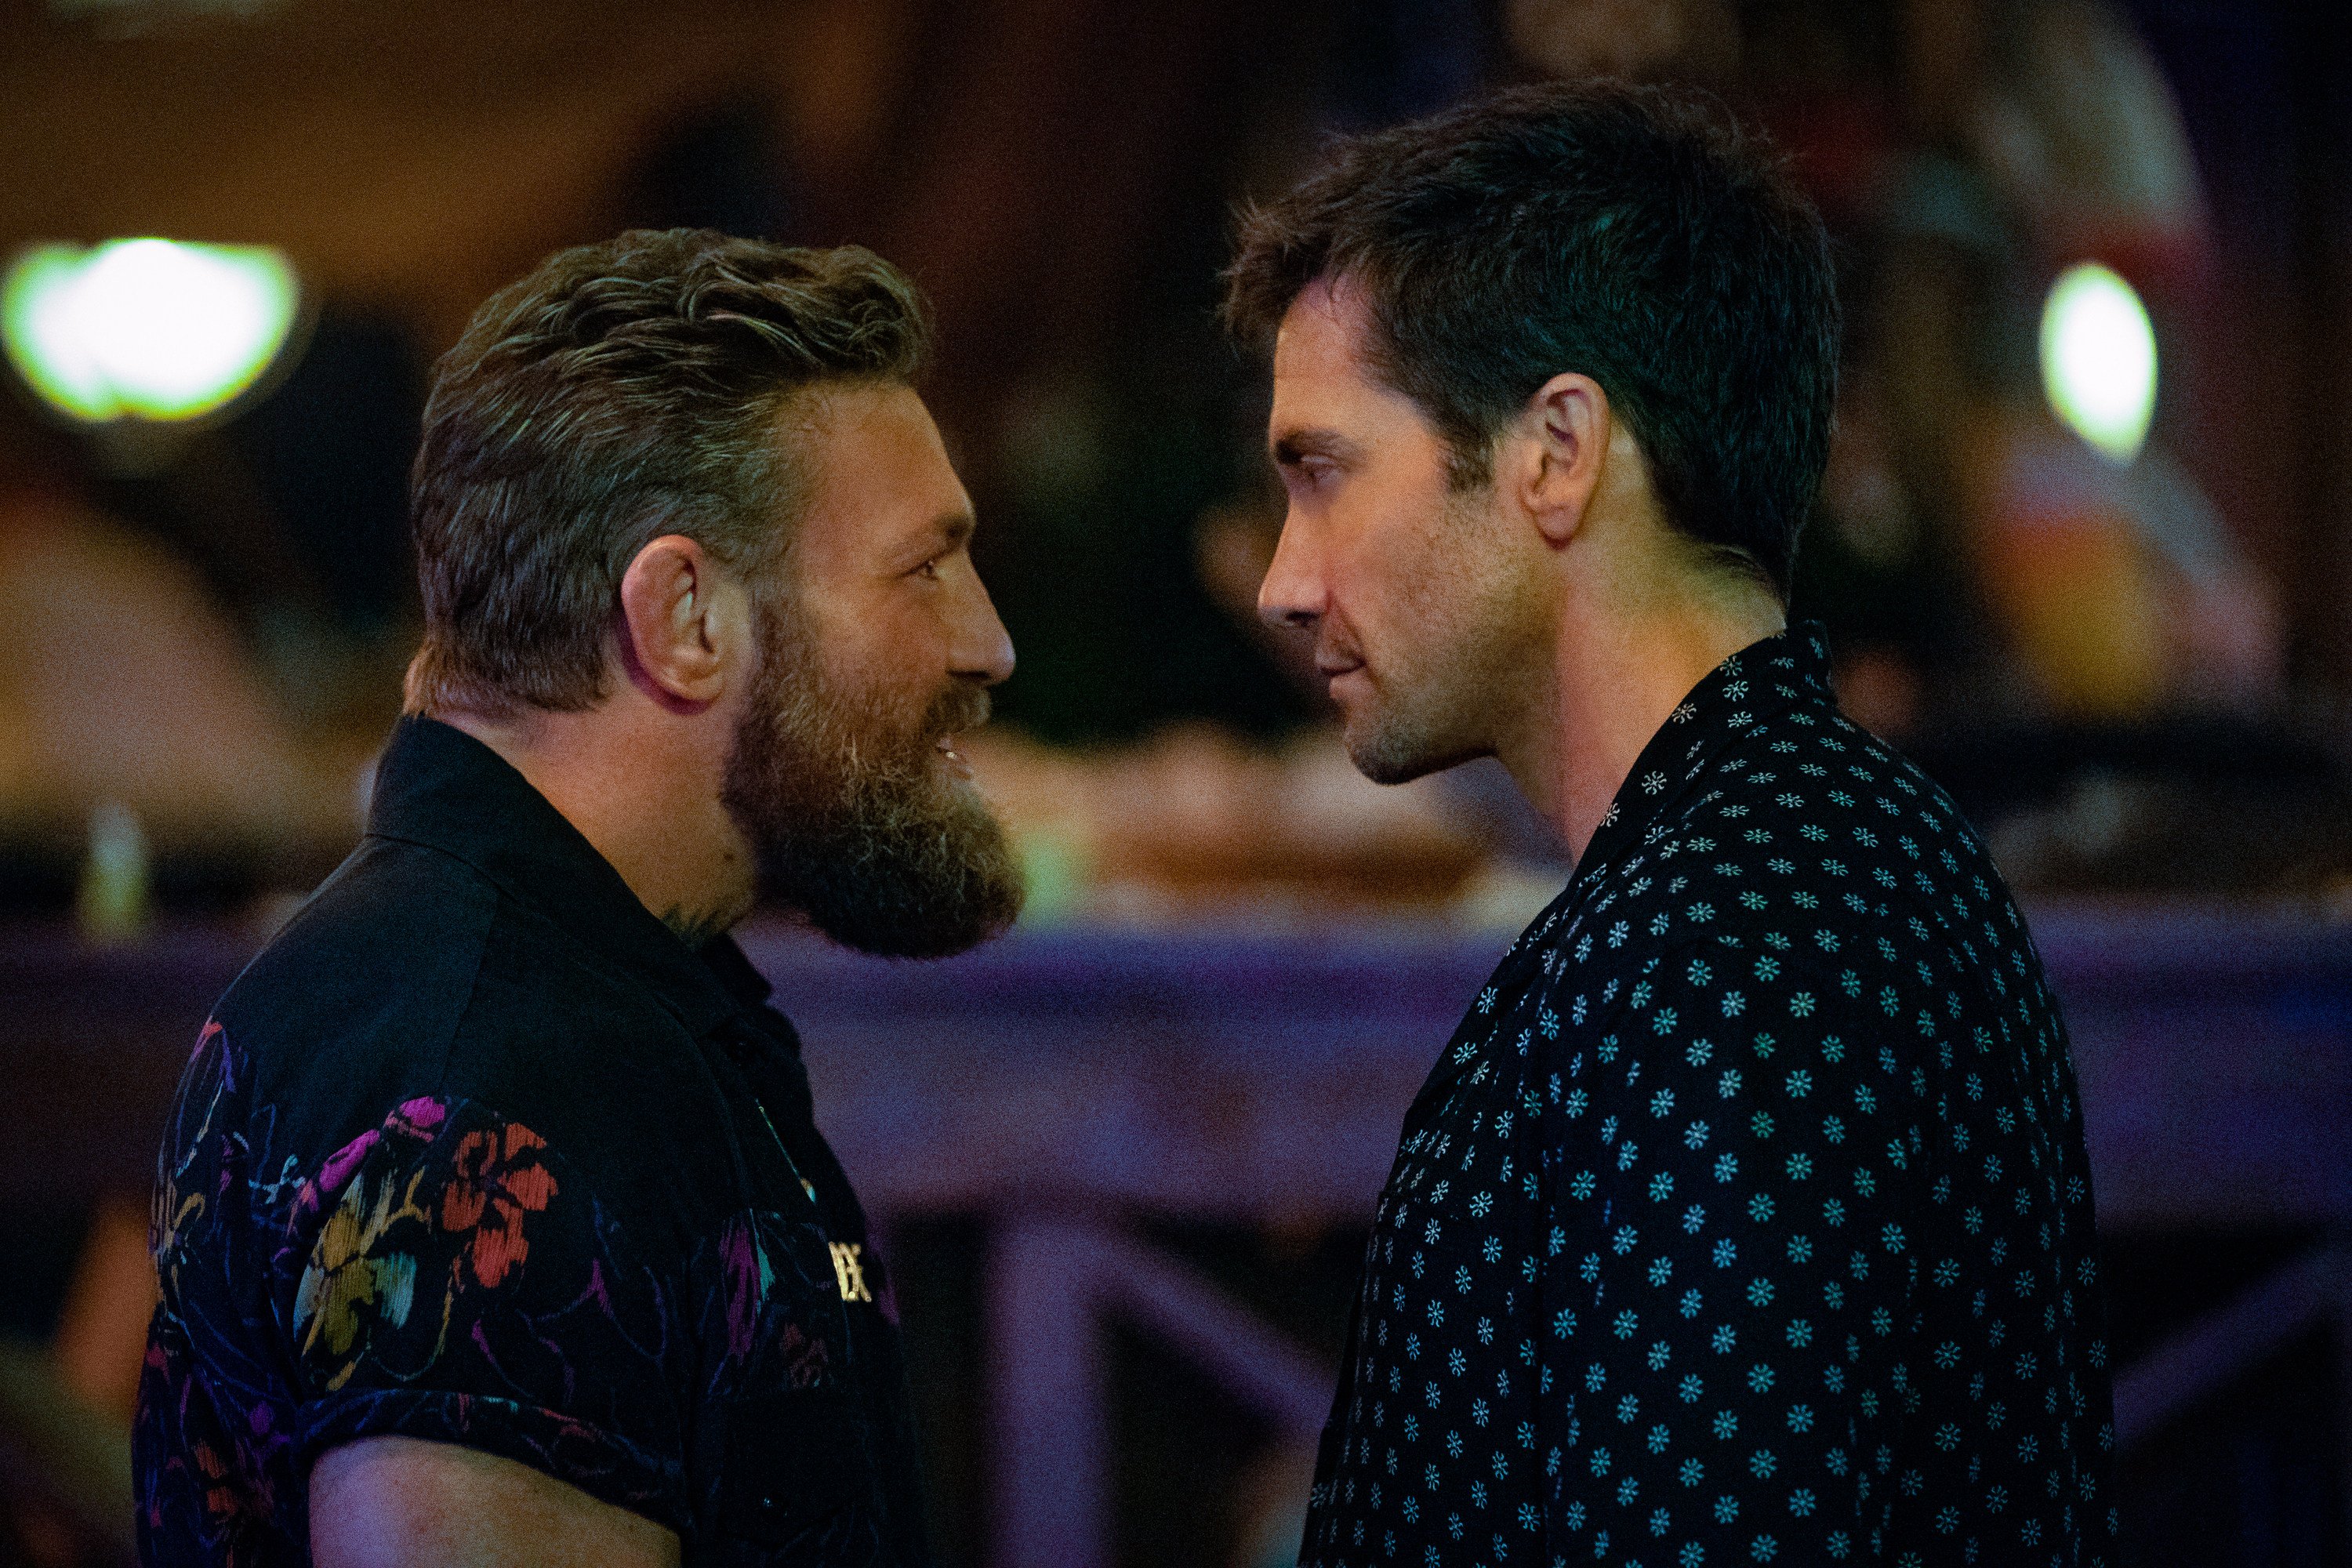 Conor McGregor (left) and Jake Gyllenhaal in a still from Road House. Photo: Laura Radford/Prime Video.